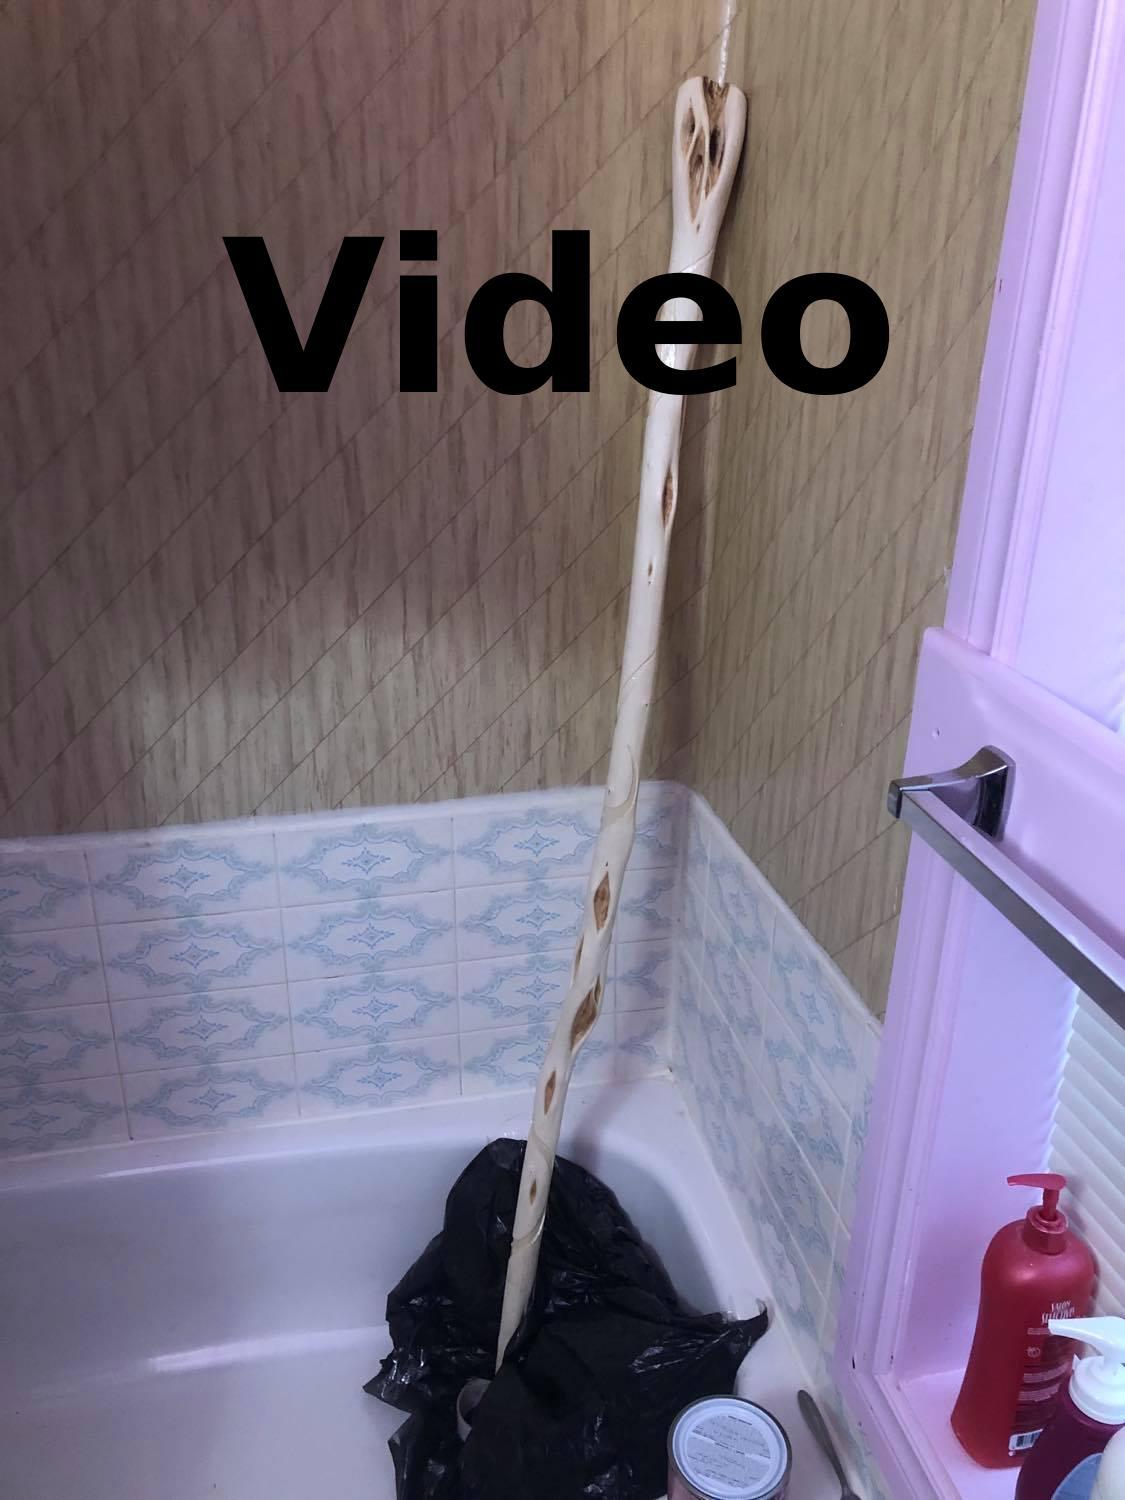 A photo of the staff up in the corner of the bathtub for varnishing, with text saying Video at the top.